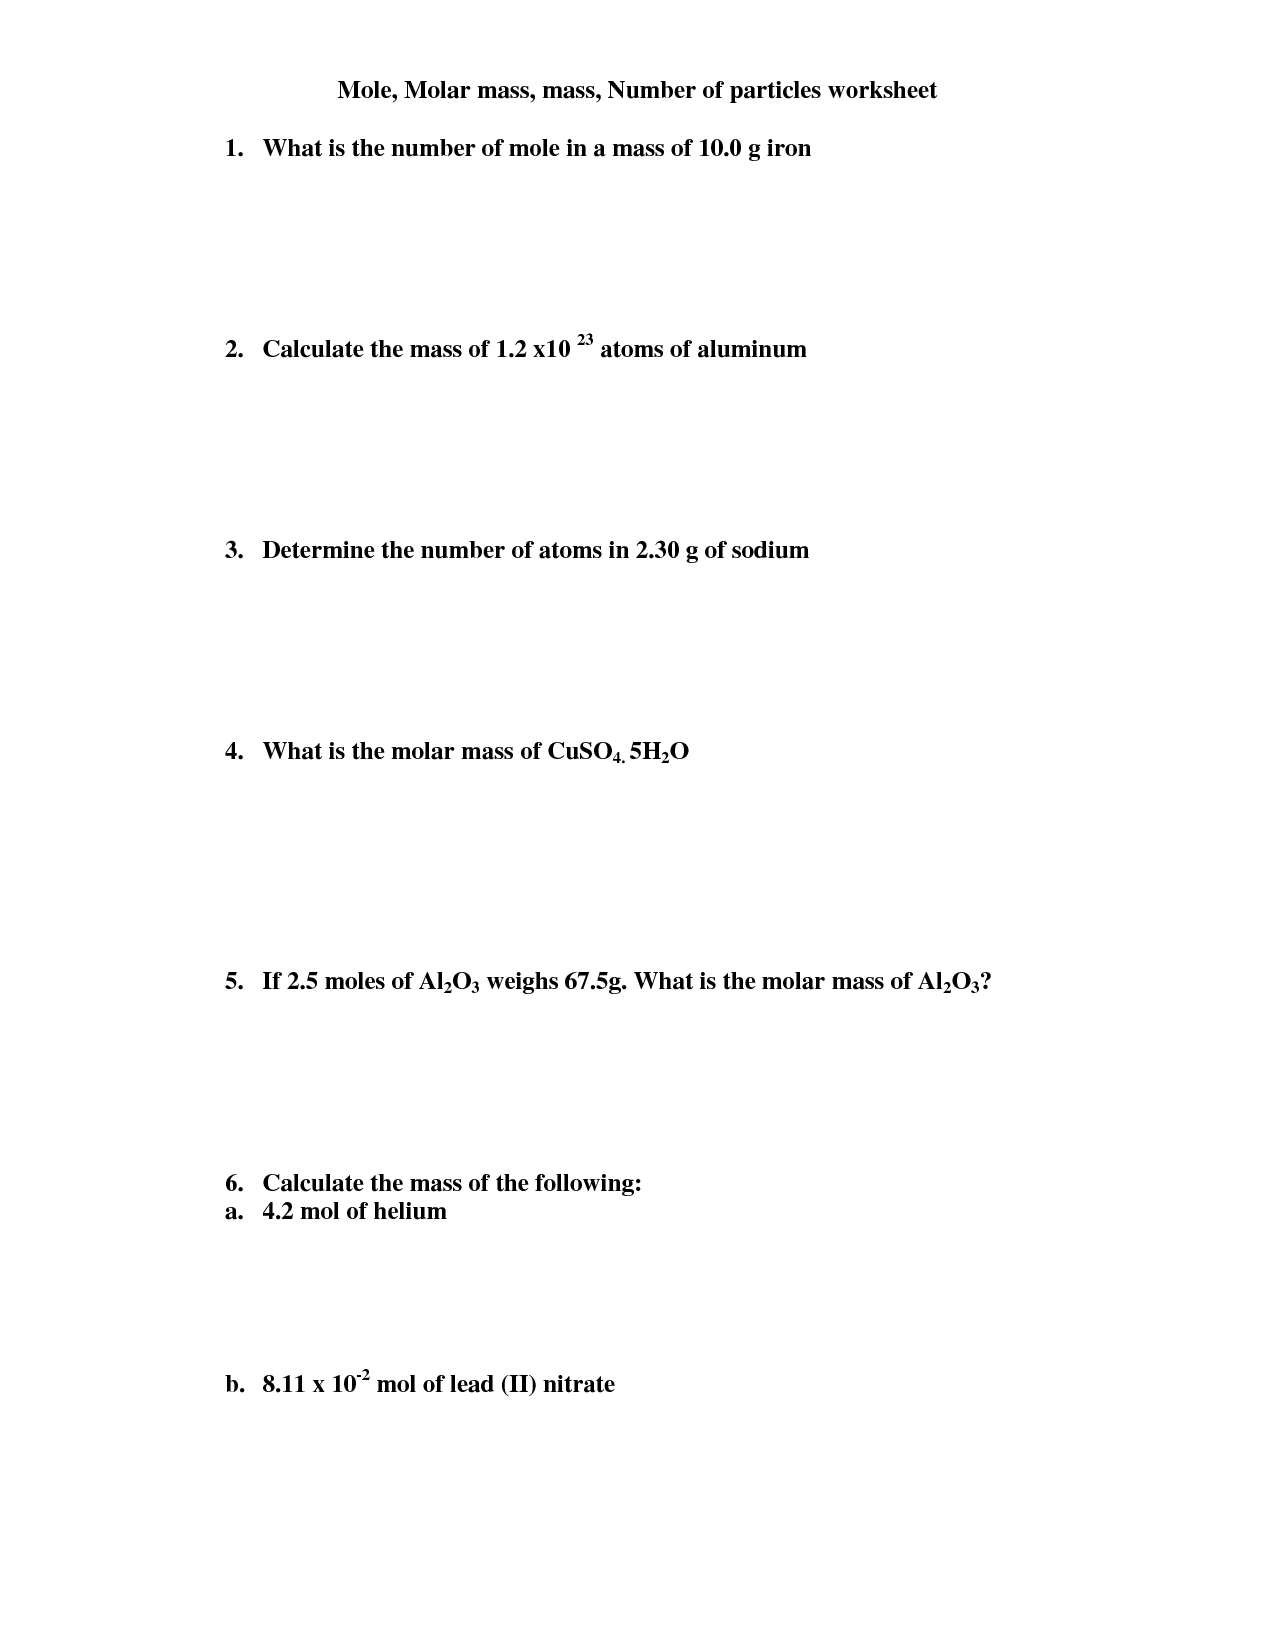 18-best-images-of-moles-worksheet-with-answers-mole-ratio-worksheet-answers-mole-calculation